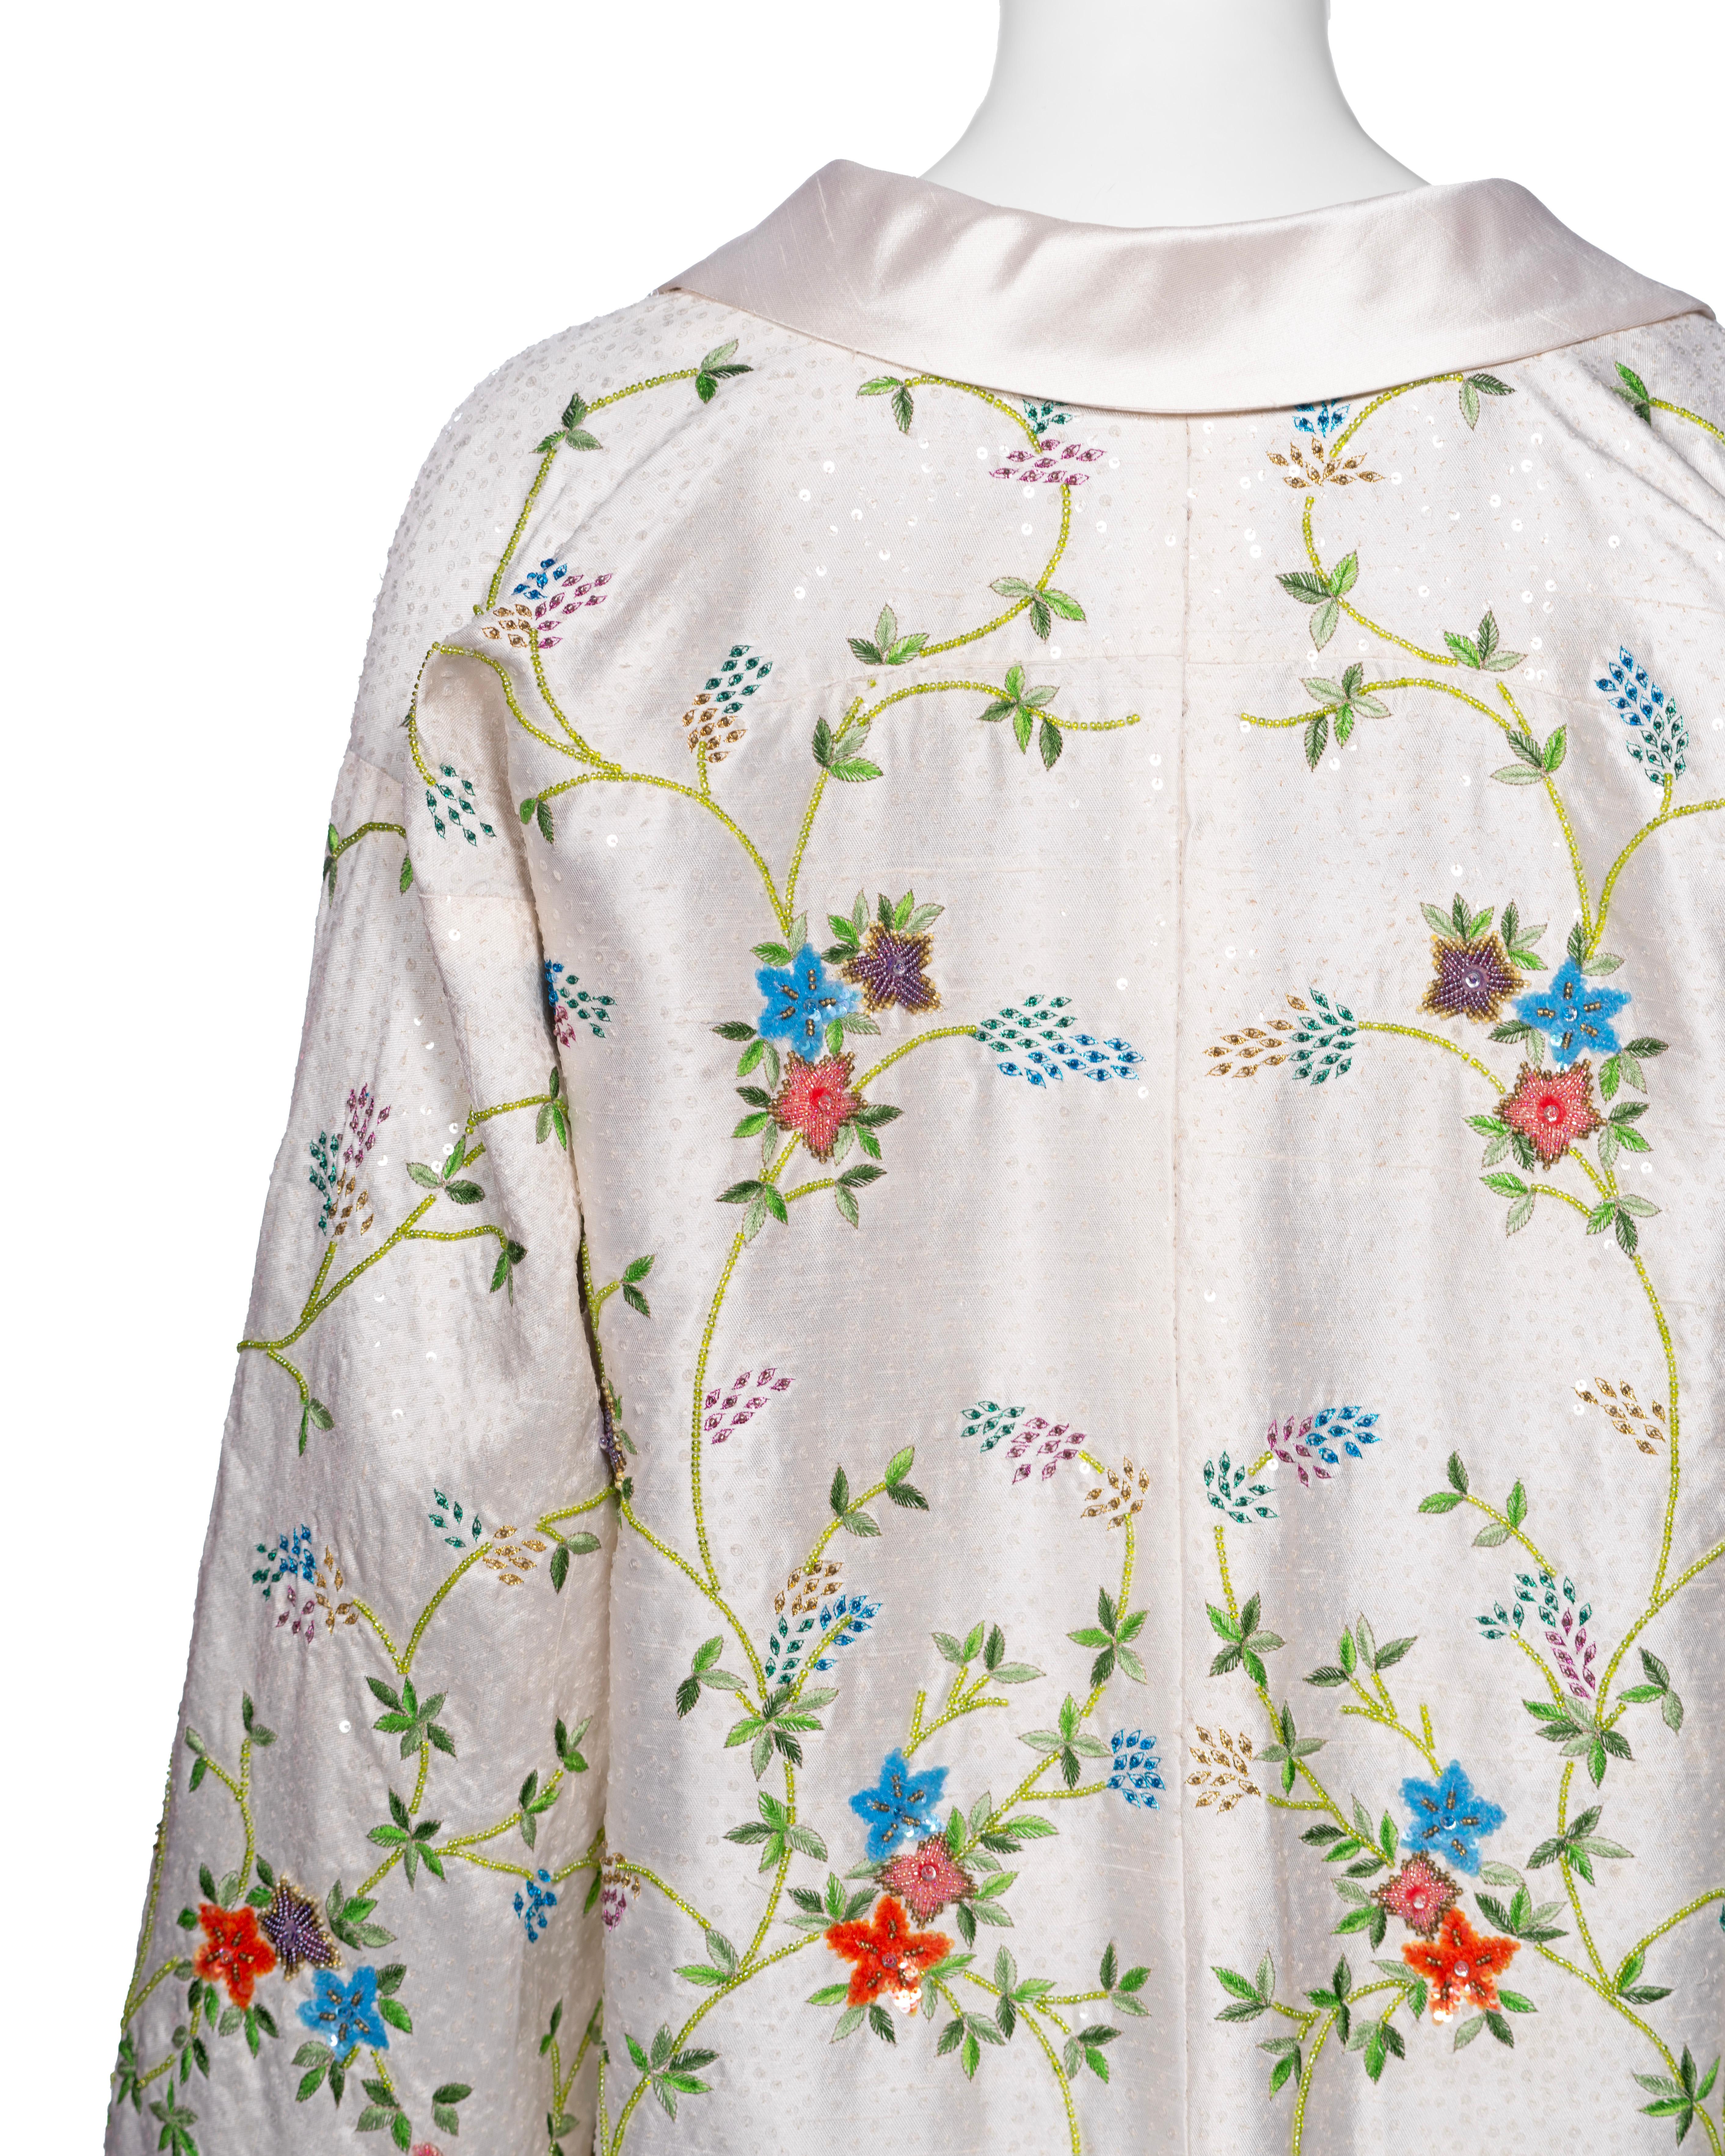 Dolce & Gabbana Hand-Embroidered White Raw Silk Evening Couture Coat, ss 1997 For Sale 10